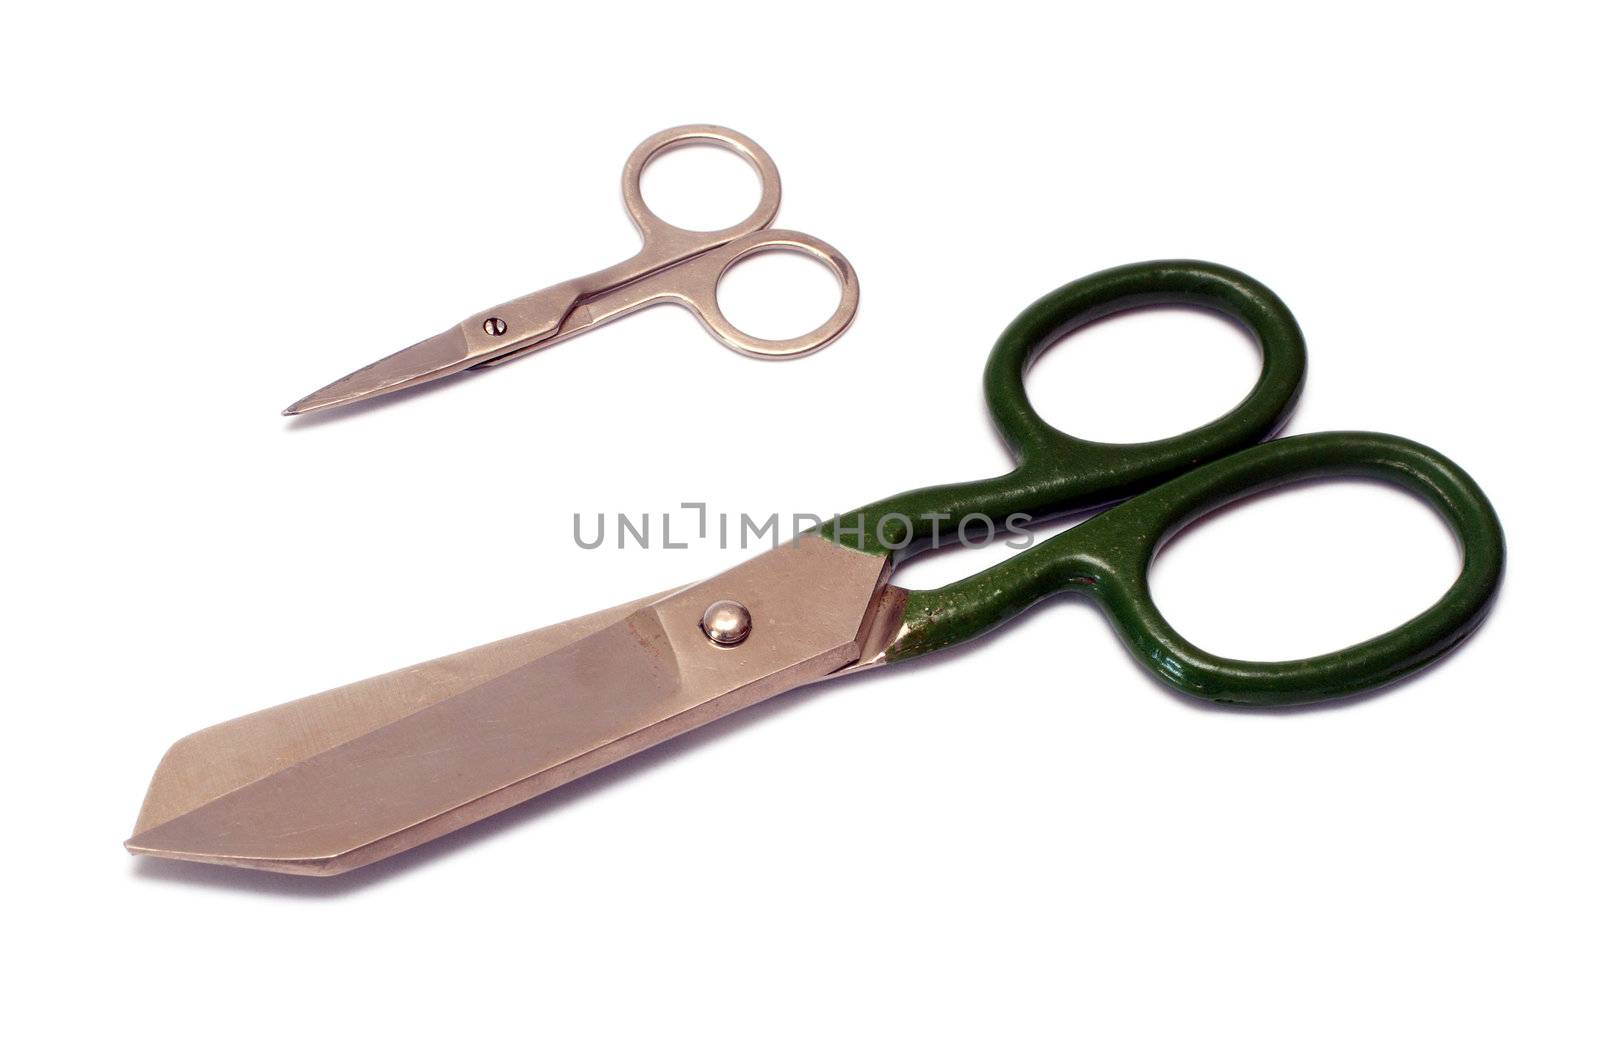 big and small shears by Mikko